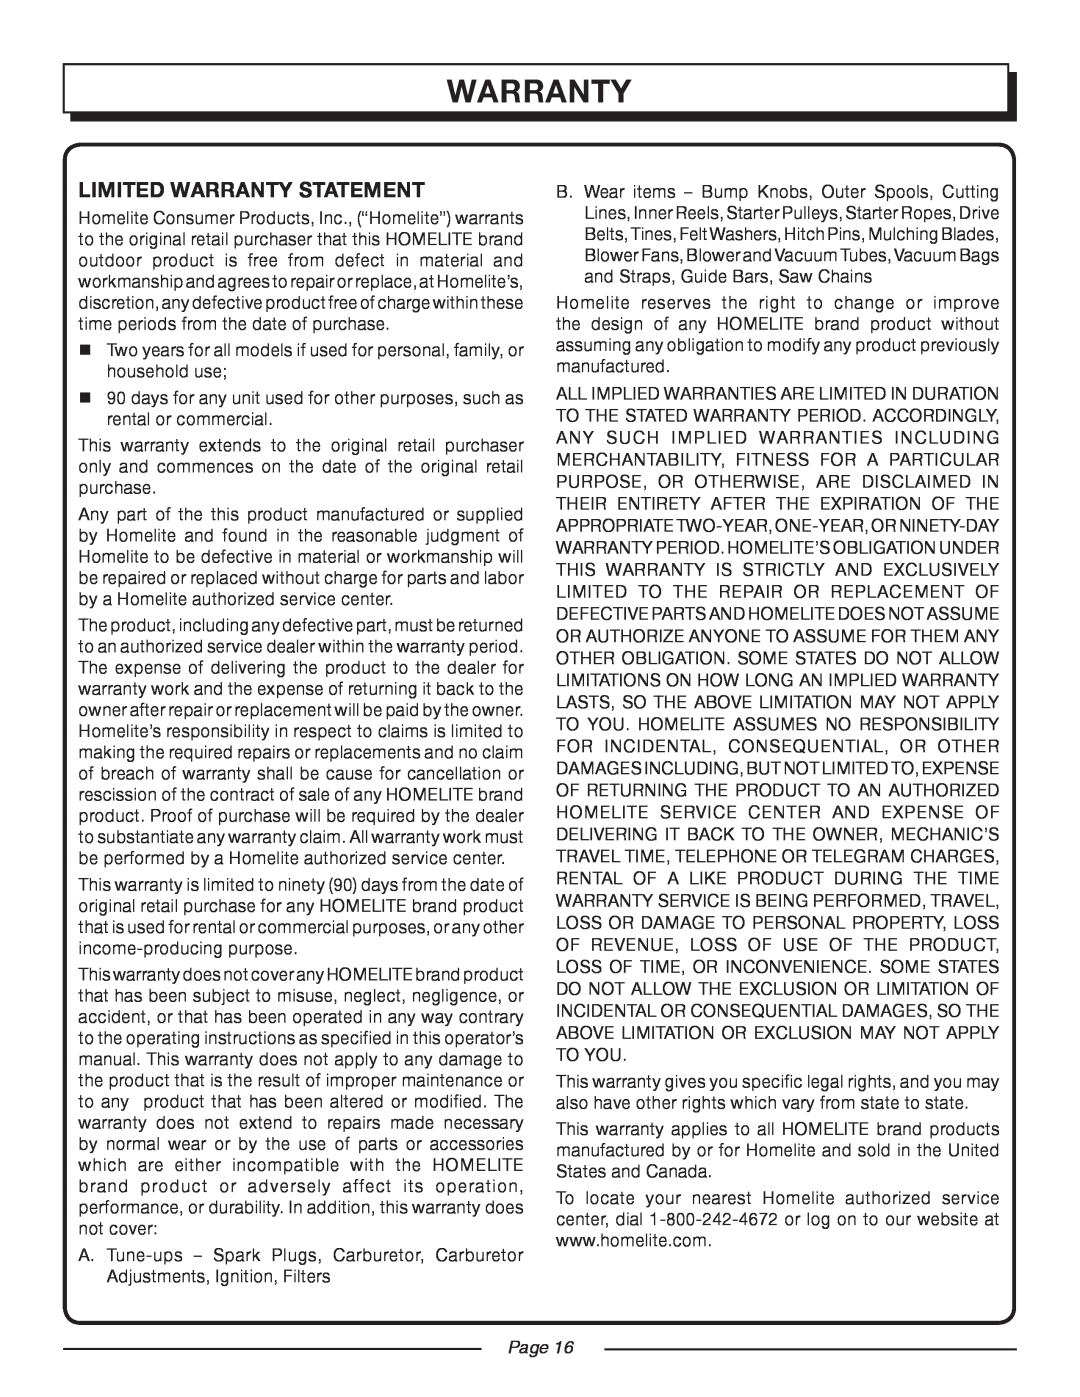 Homelite UT45100 manual Limited Warranty Statement, Page 